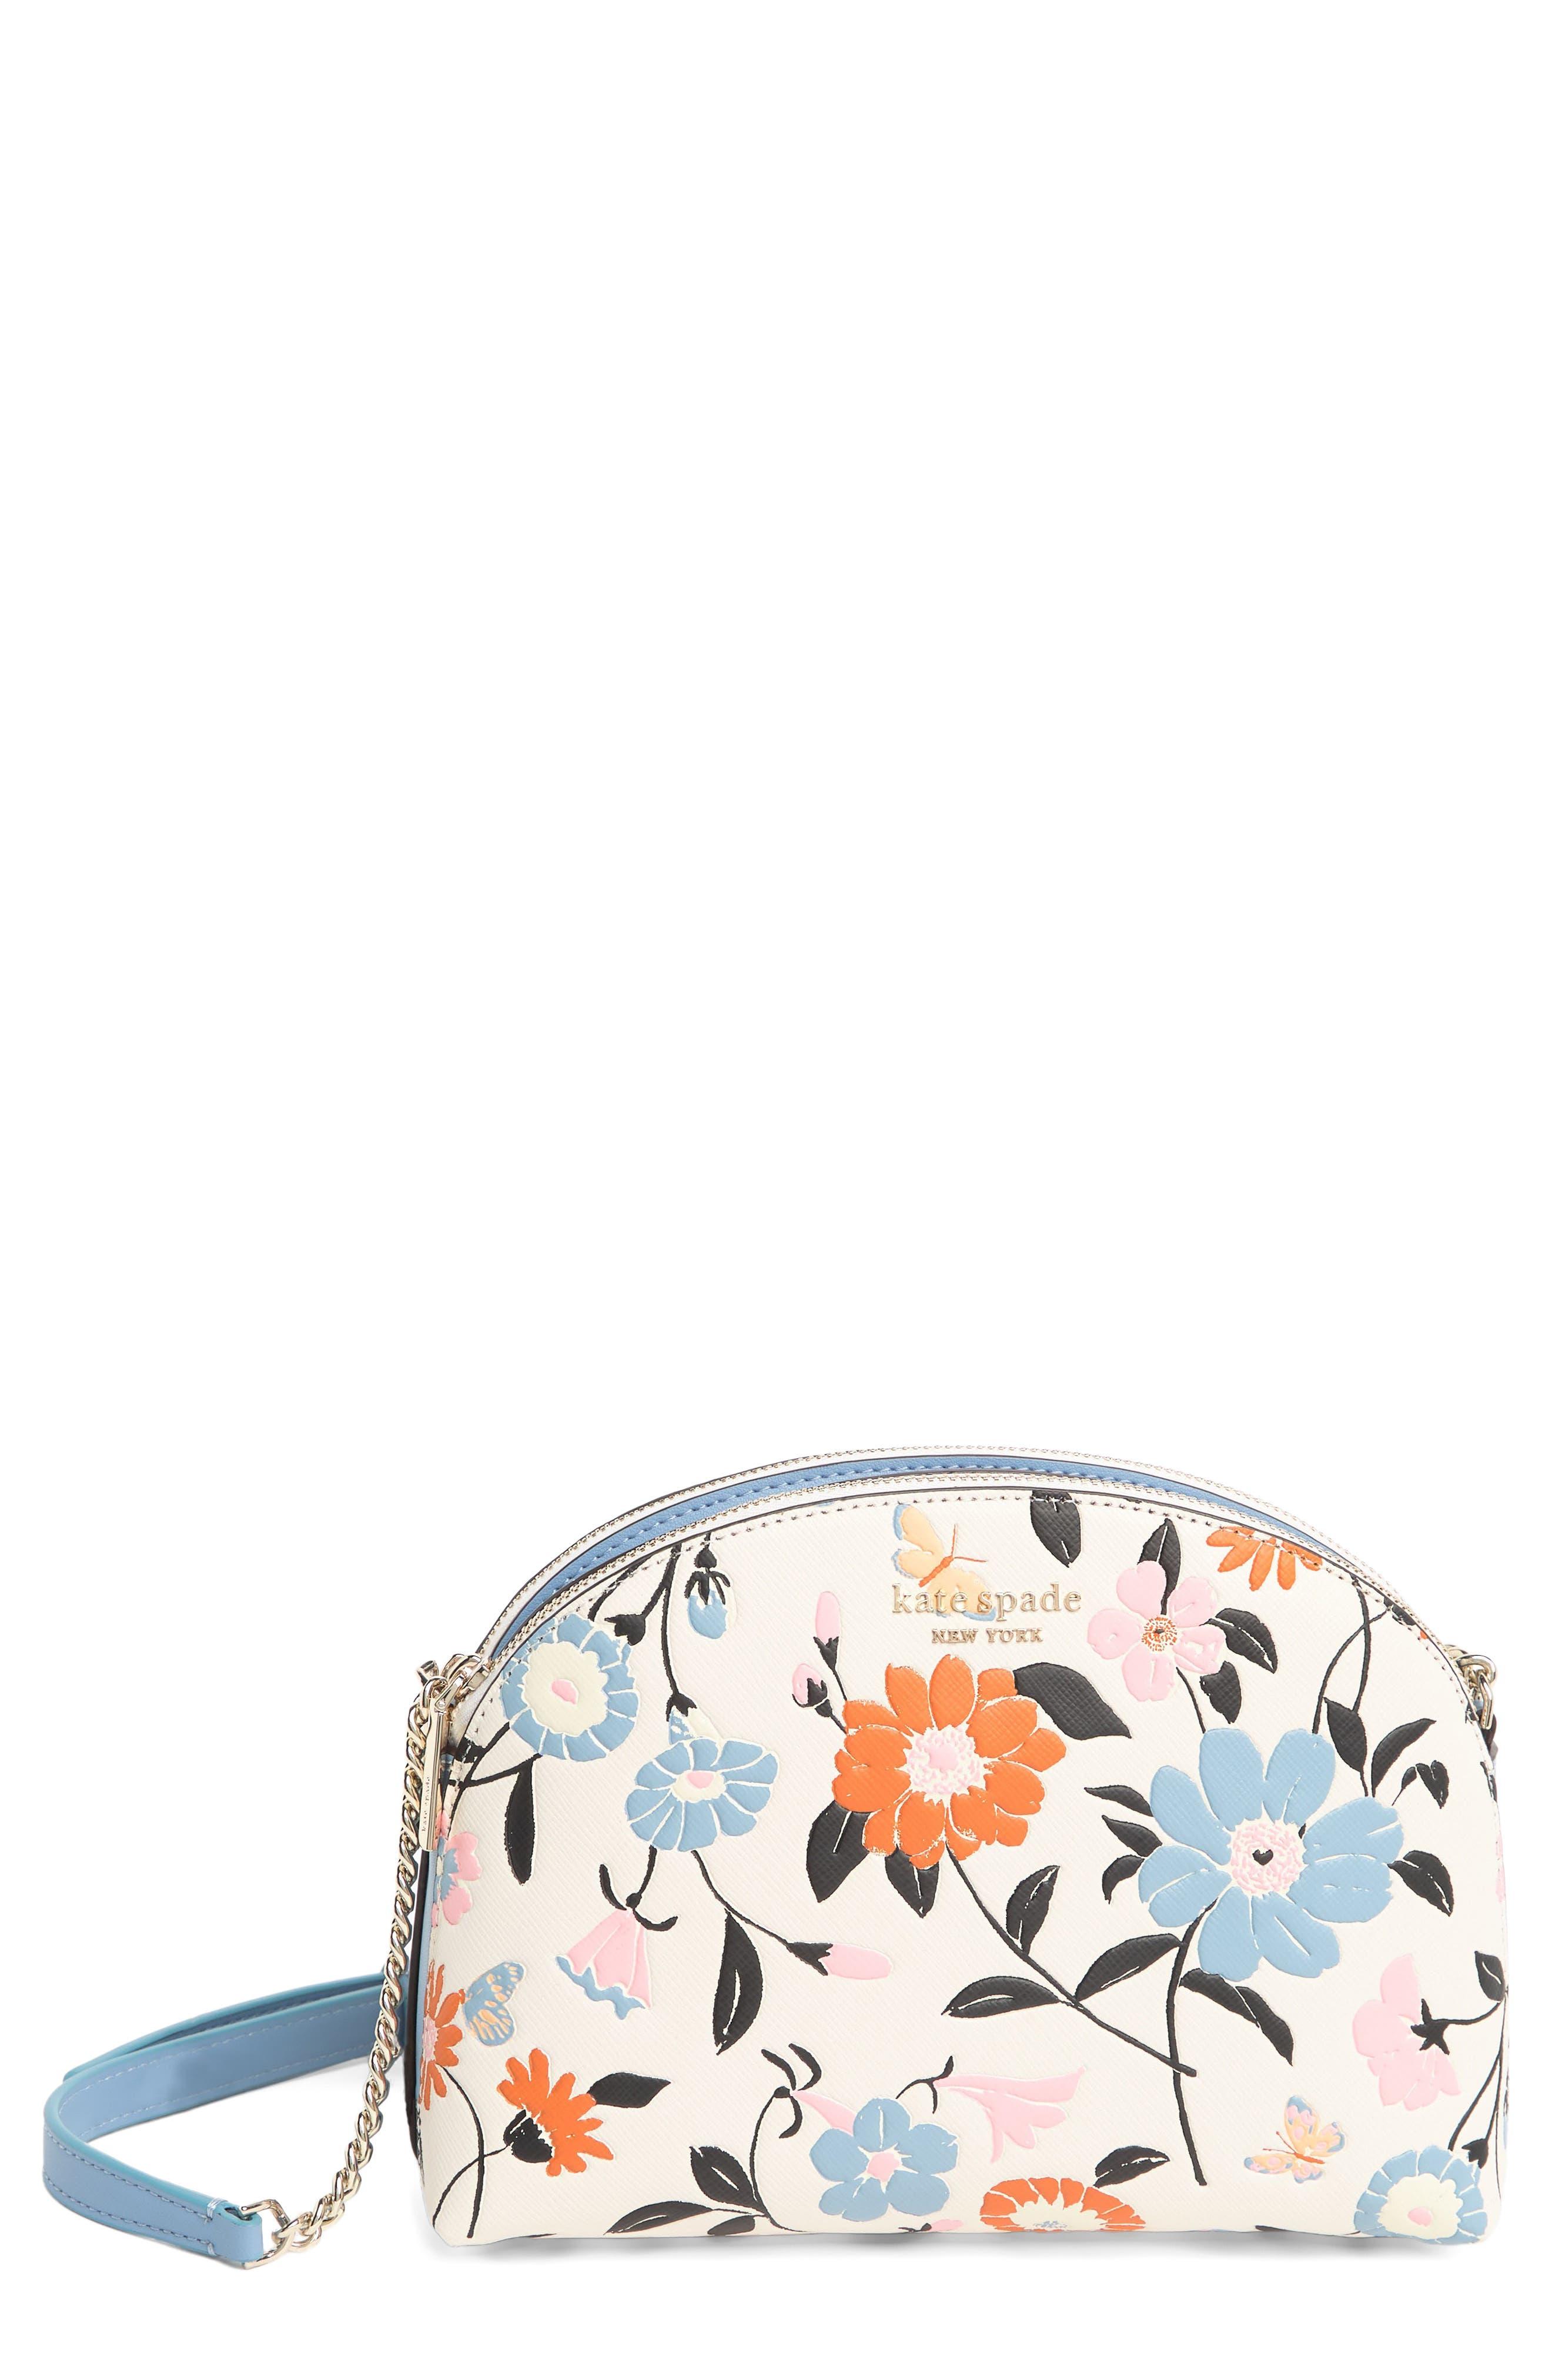 kate spade new york Spencer Saffiano Leather Double Zip Dome Crossbody